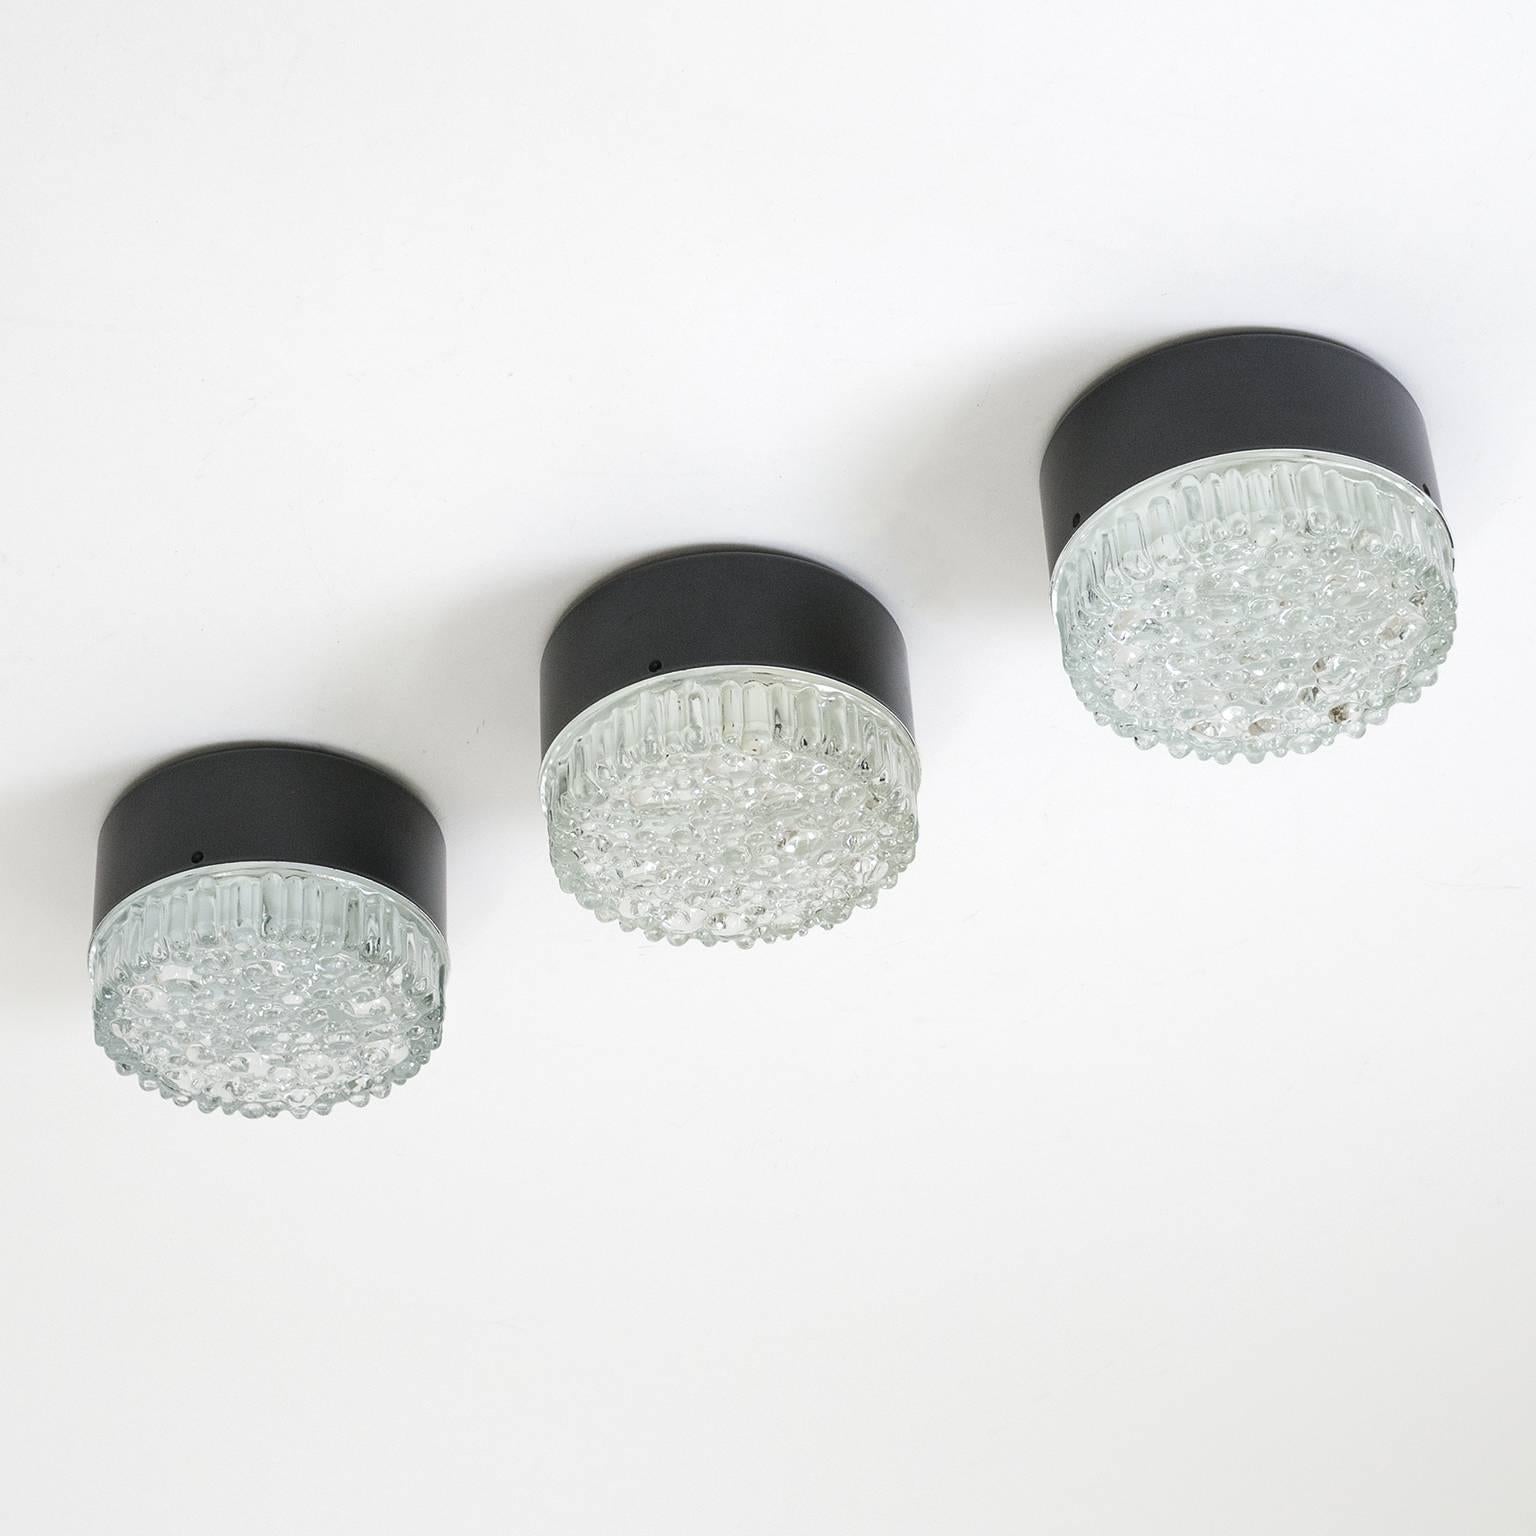 Set of three petite bubble glass flush mounts or wall lights by Staff, 1960s. Heavily textured glass diffuser with 'bubbles' of varying sizes attached to a black lacquered metal base. One E14 socket per light with new wiring.